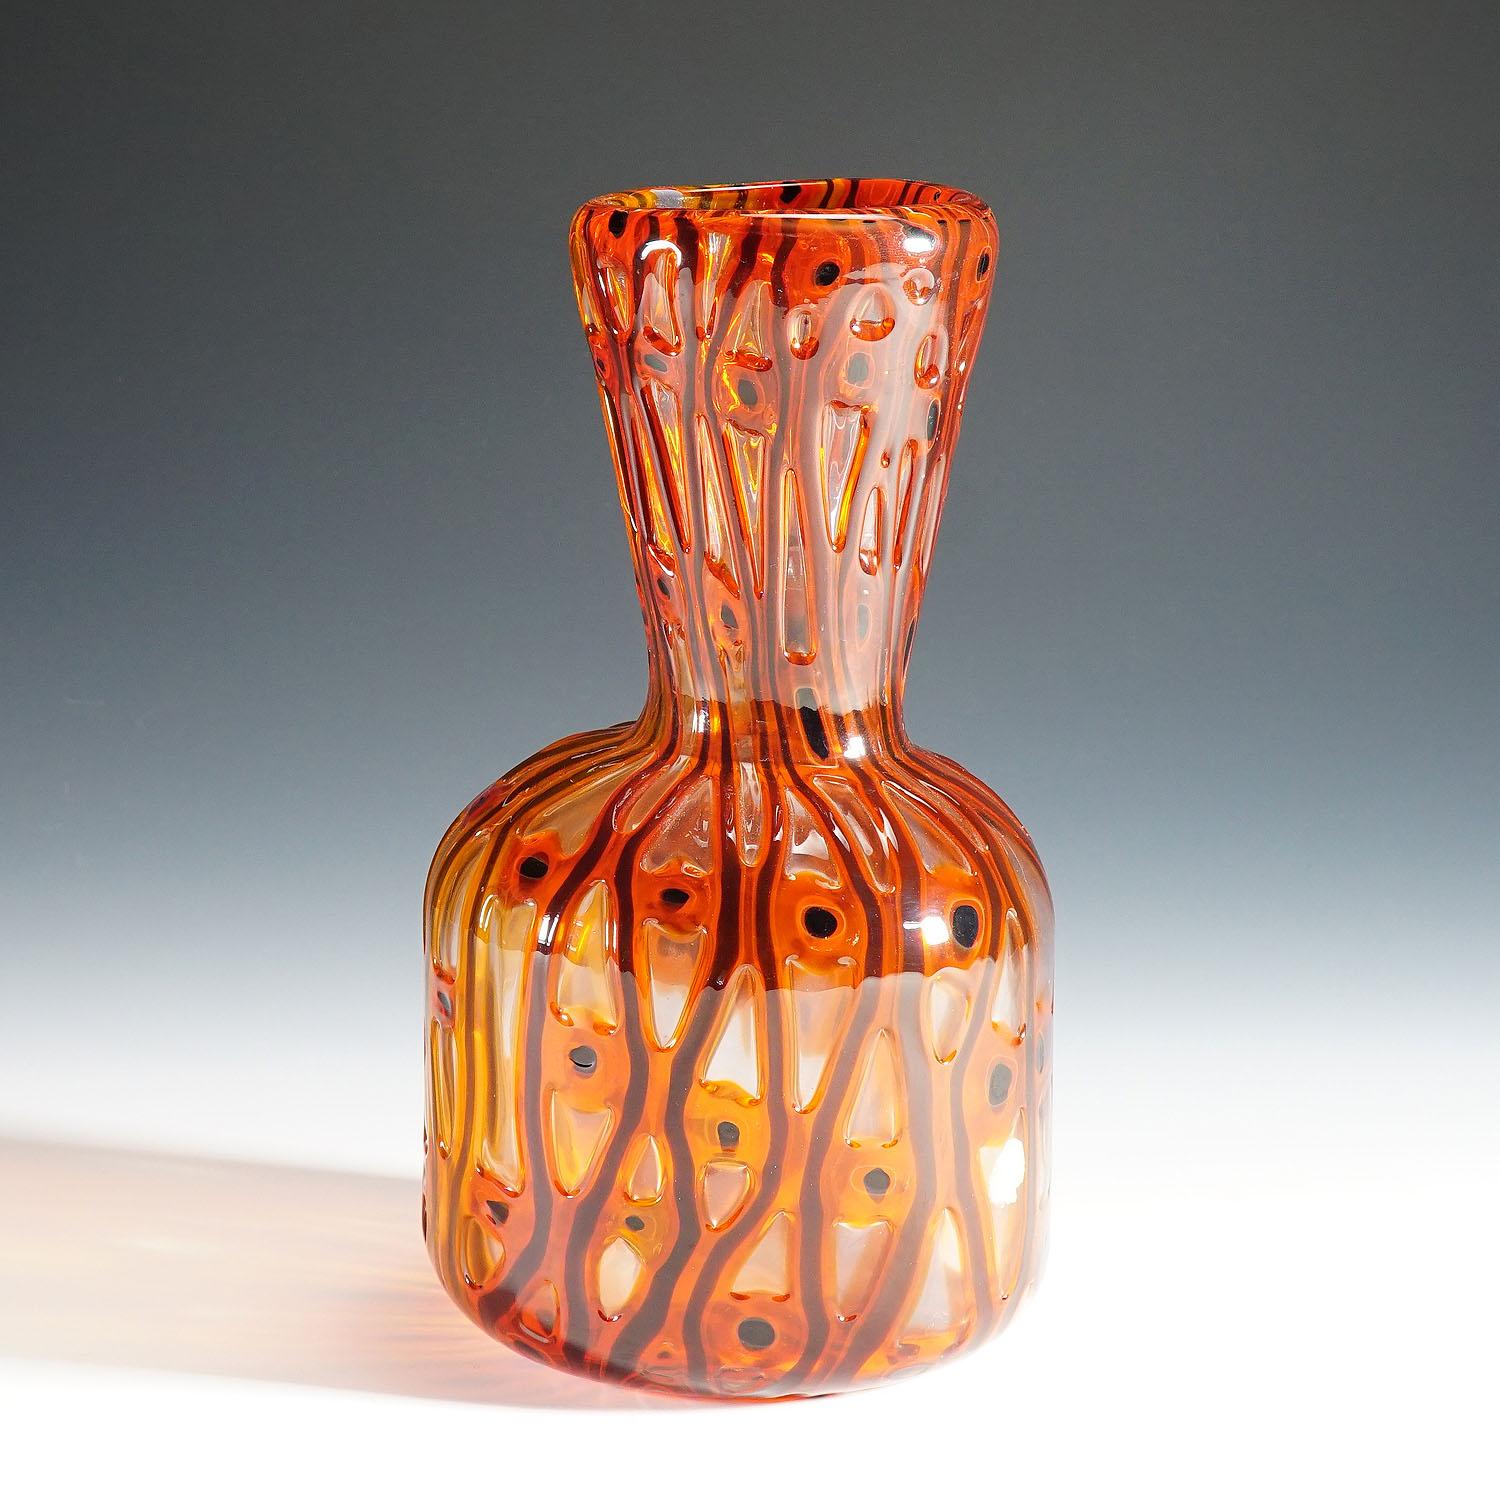 A large venetian glass vase 'transennati' manufactured by A.Ve.M. and designed by anzolo fuga in the 1960s. thick clear glass decorated with orange-red murrine and 'a canne' bands.
Lit.:
rosa barovier mentasti, anzolo fuga, new york 2005, page